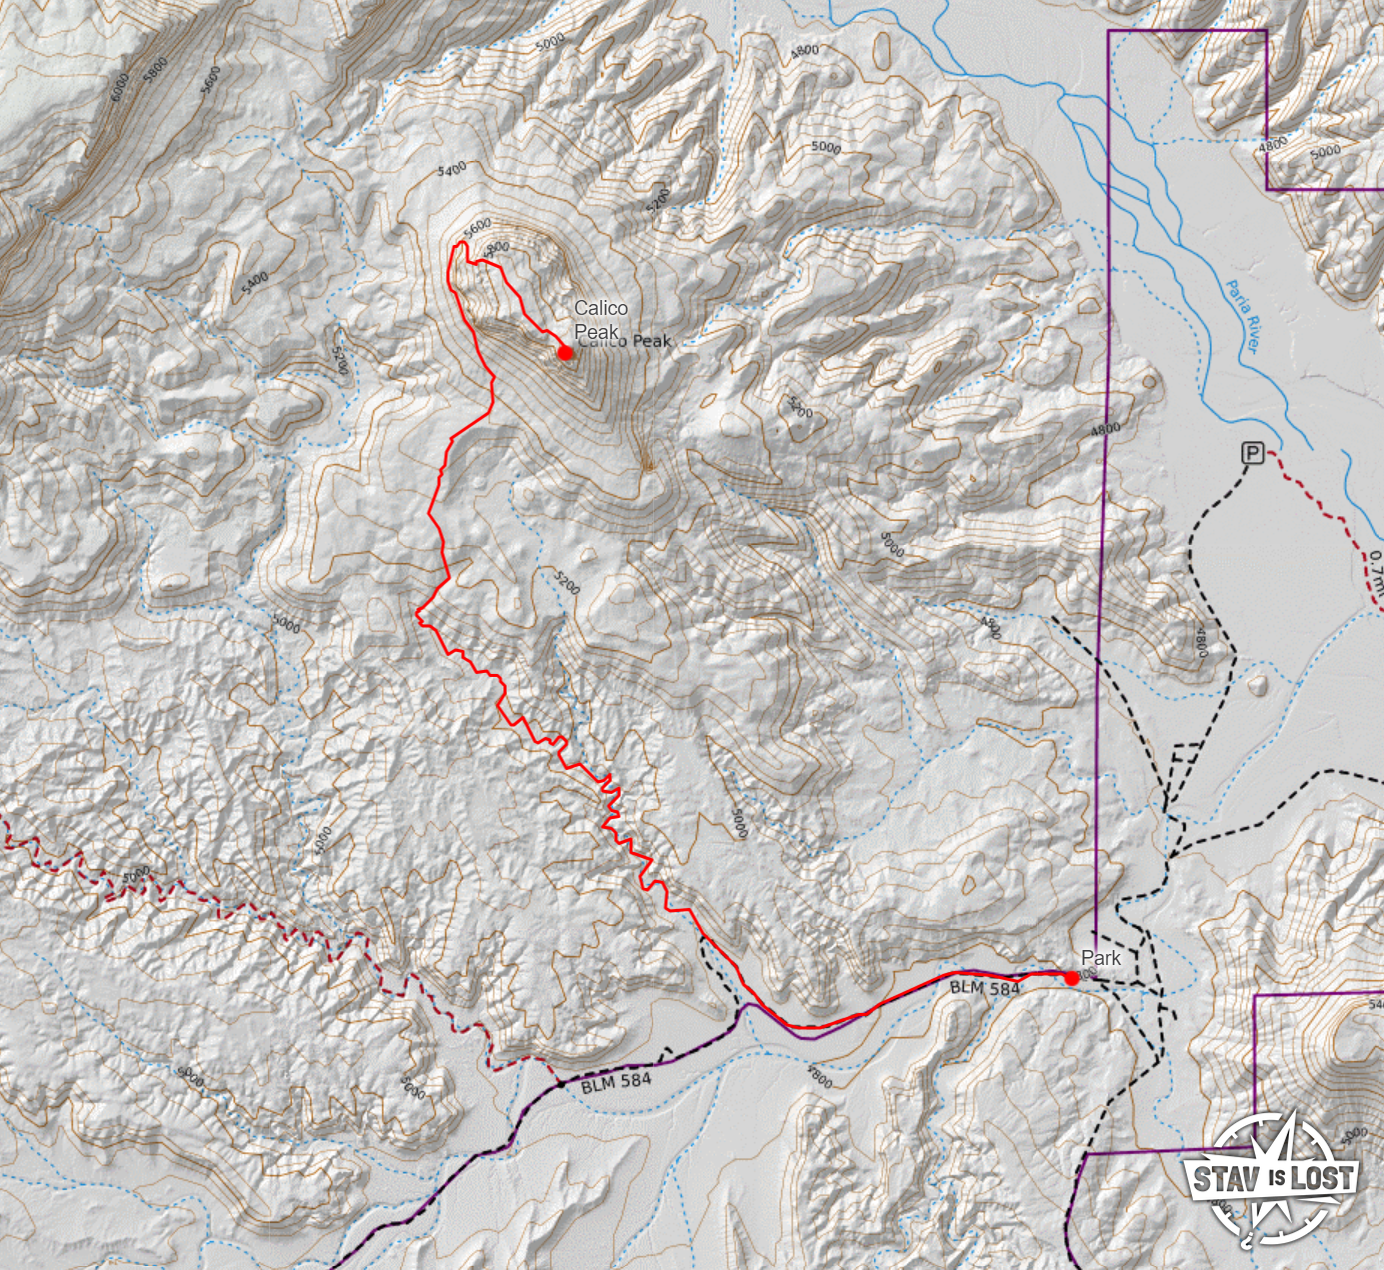 map for Calico Peak by stav is lost